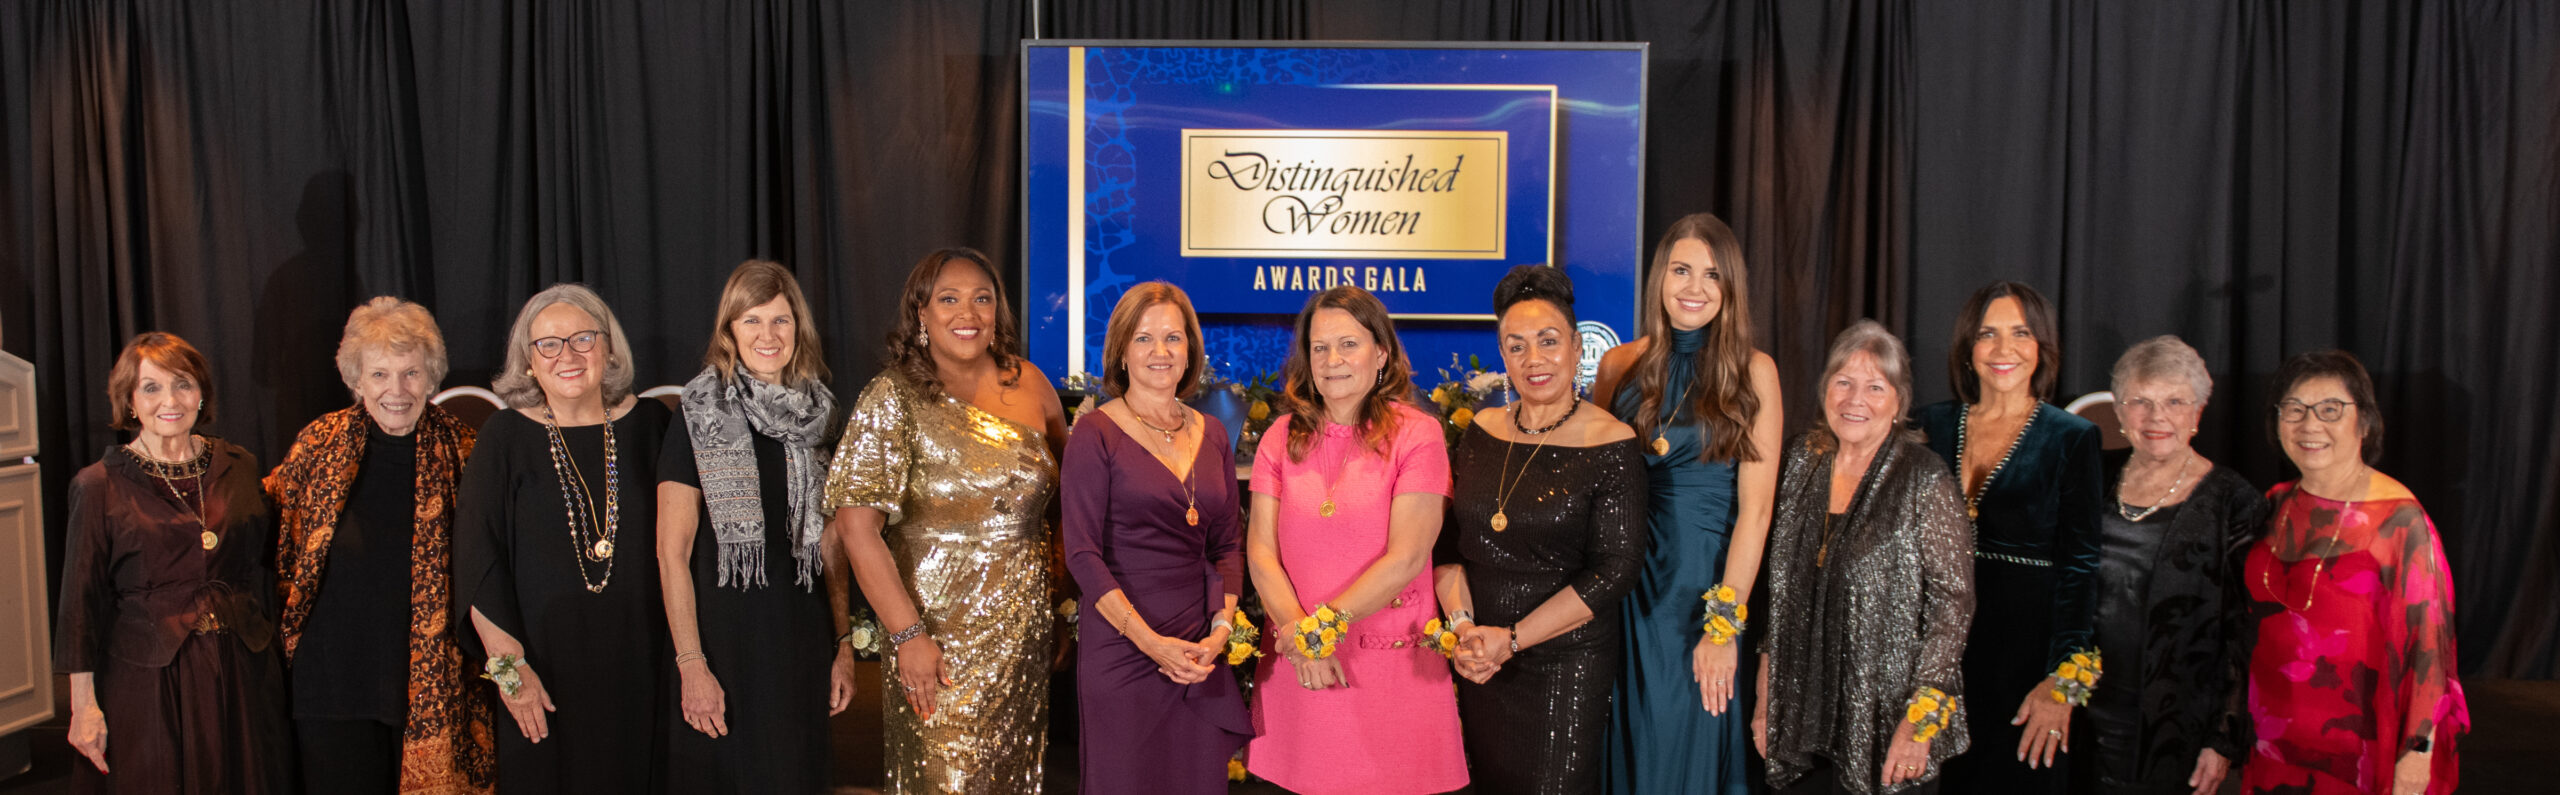 Distinguished Women honorees taking a group photo